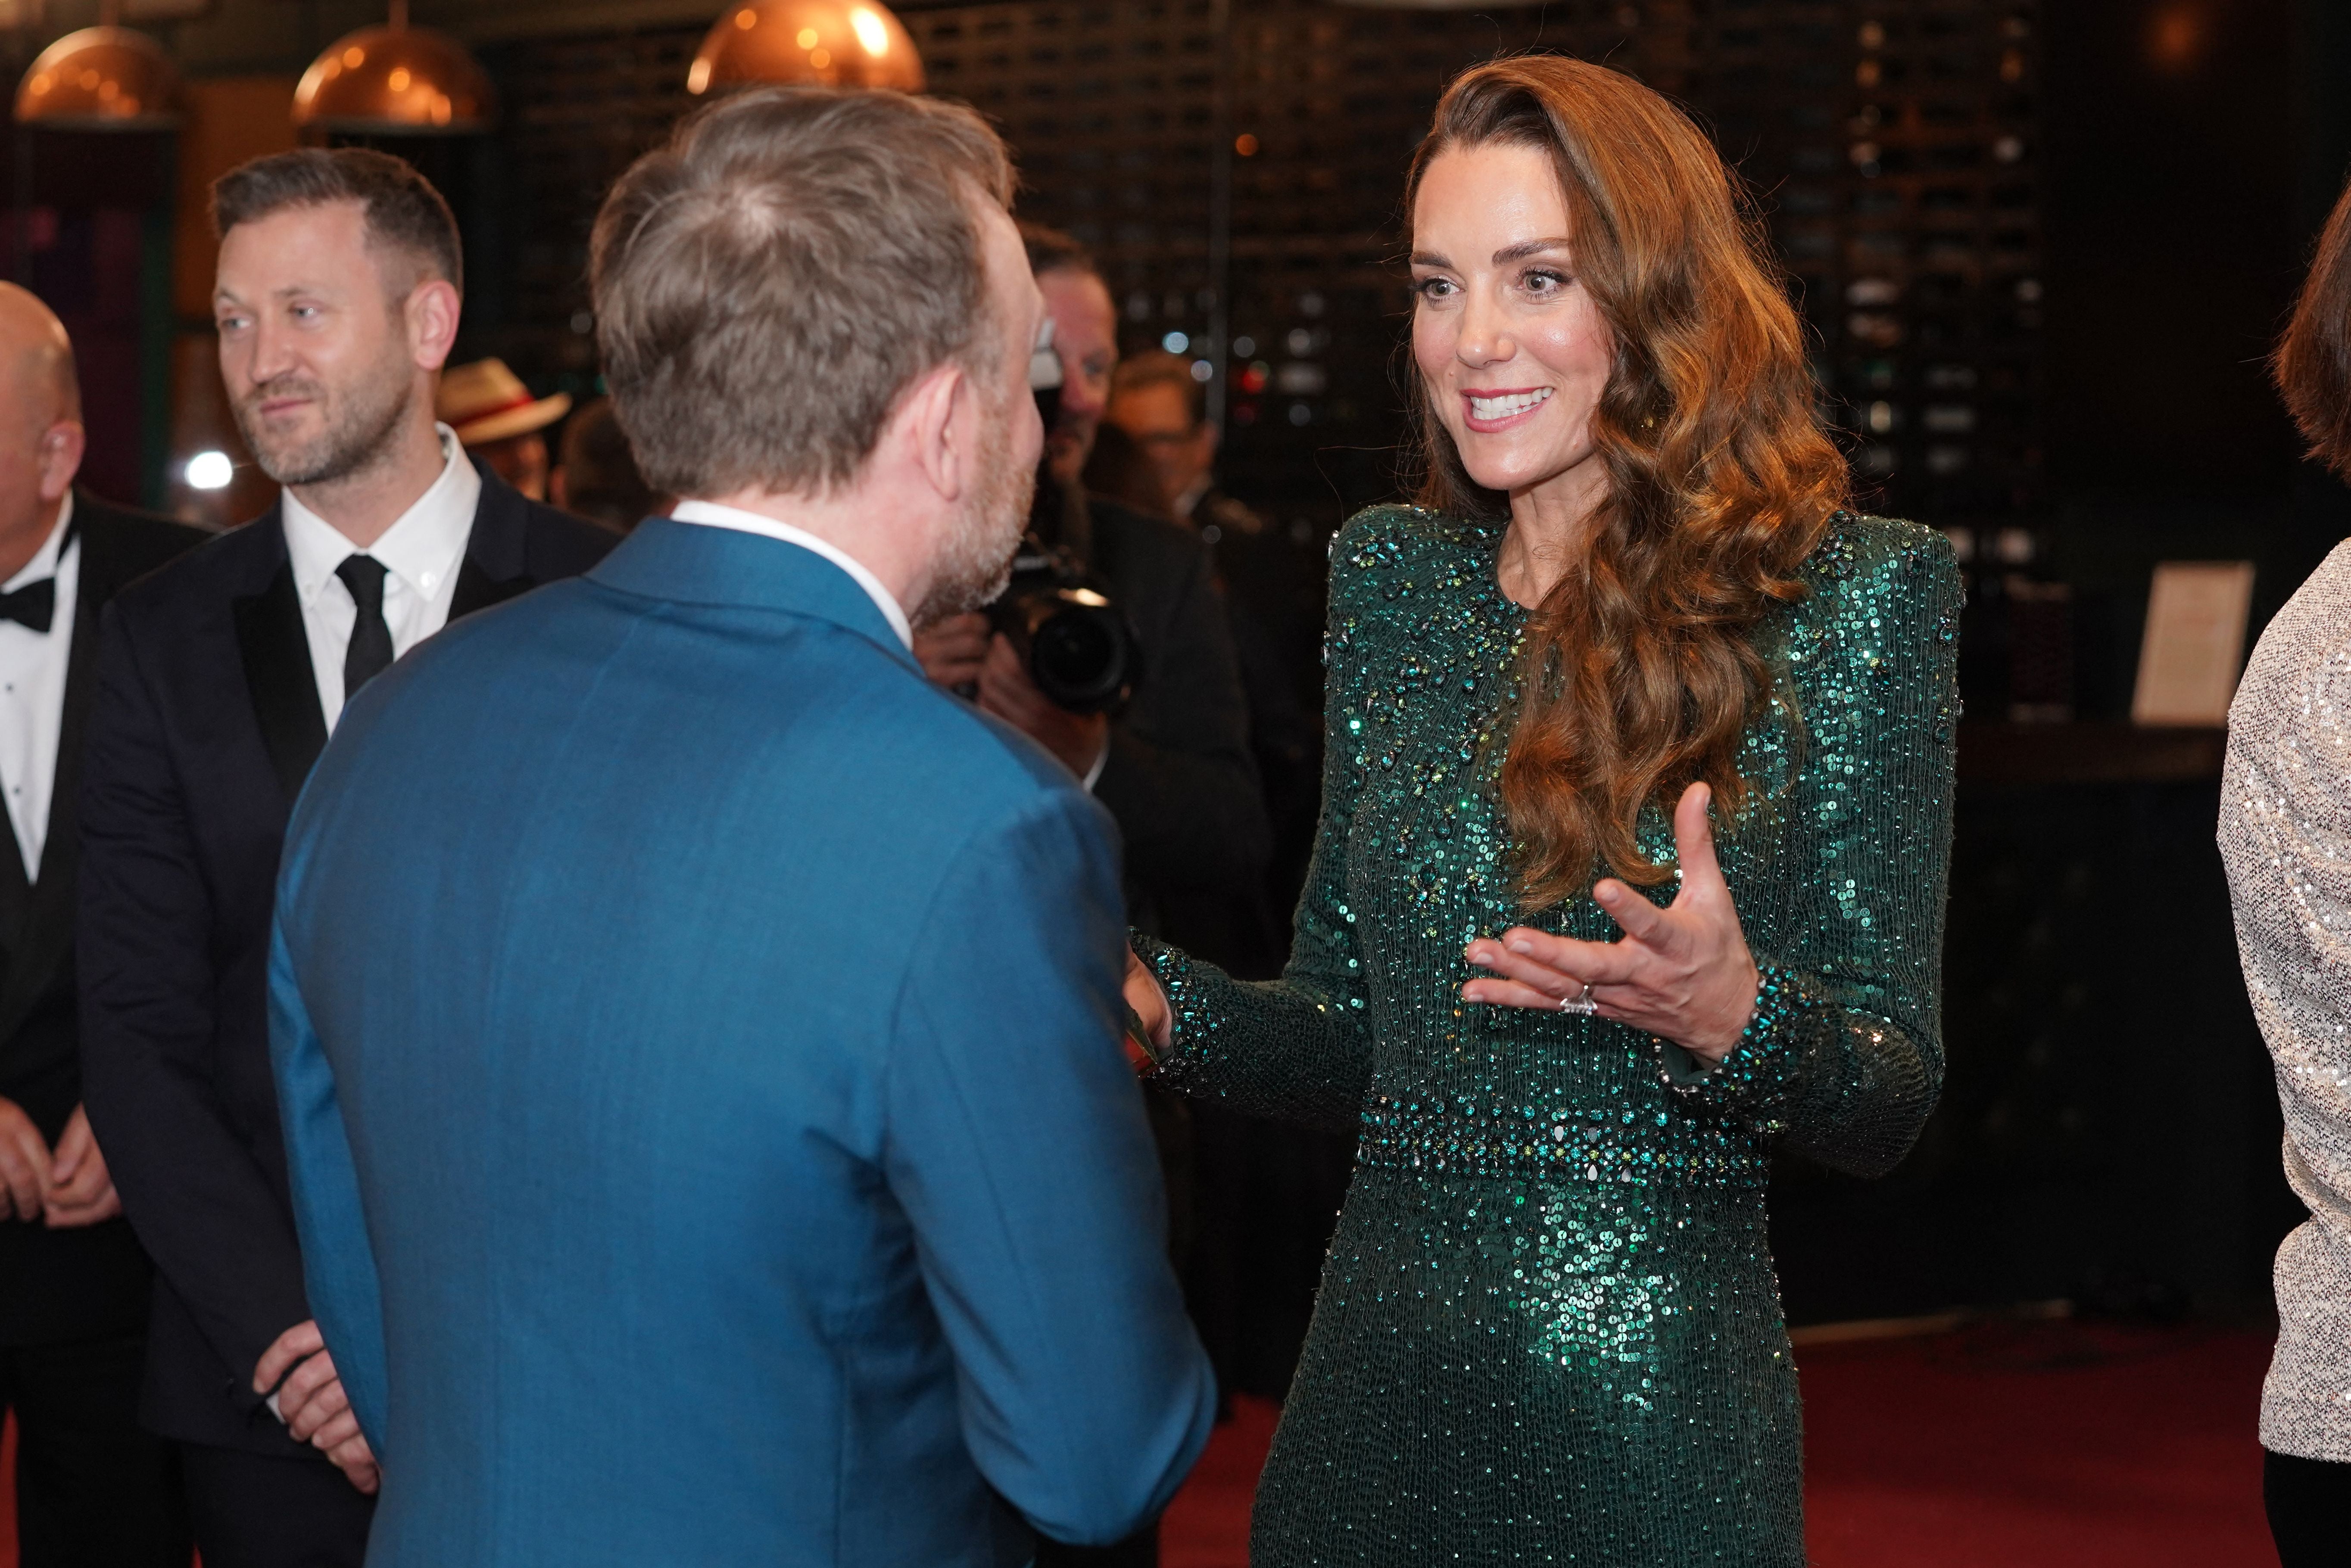 Kate Middleton news: Duchess of Cambridge wears Gucci dress and